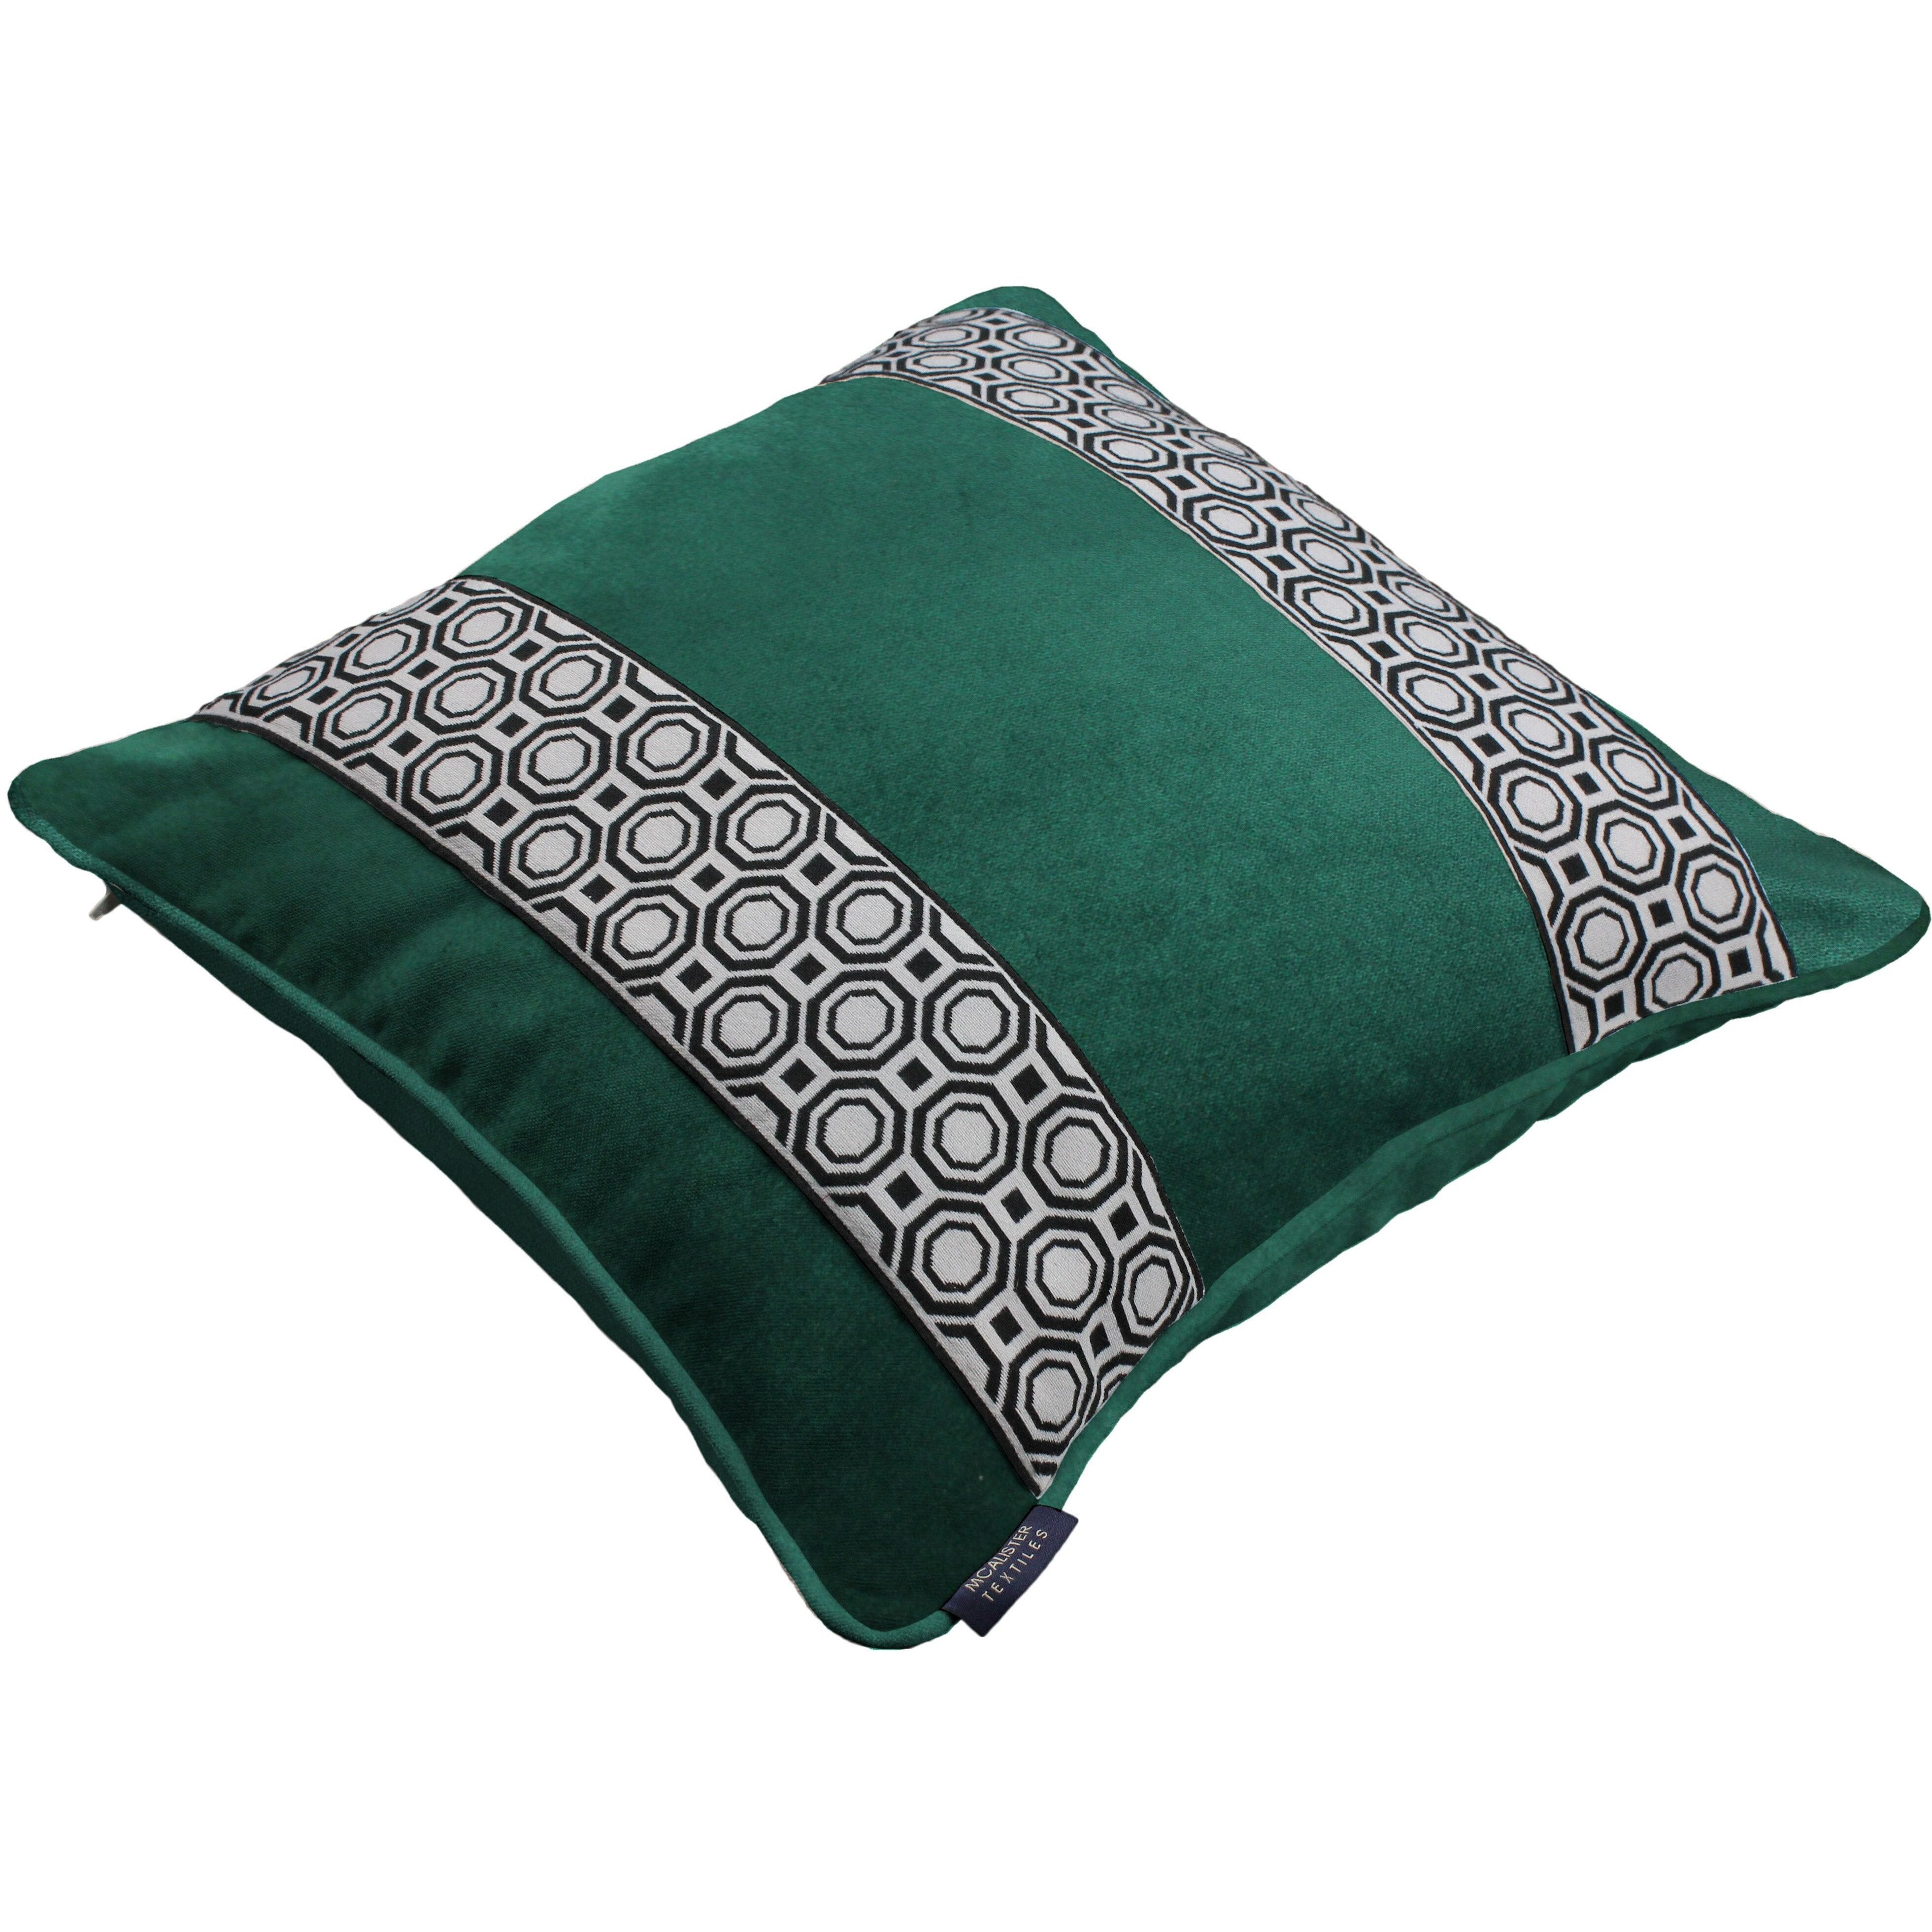 McAlister Textiles Cancun Striped Emerald Green Velvet Cushion Cushions and Covers 